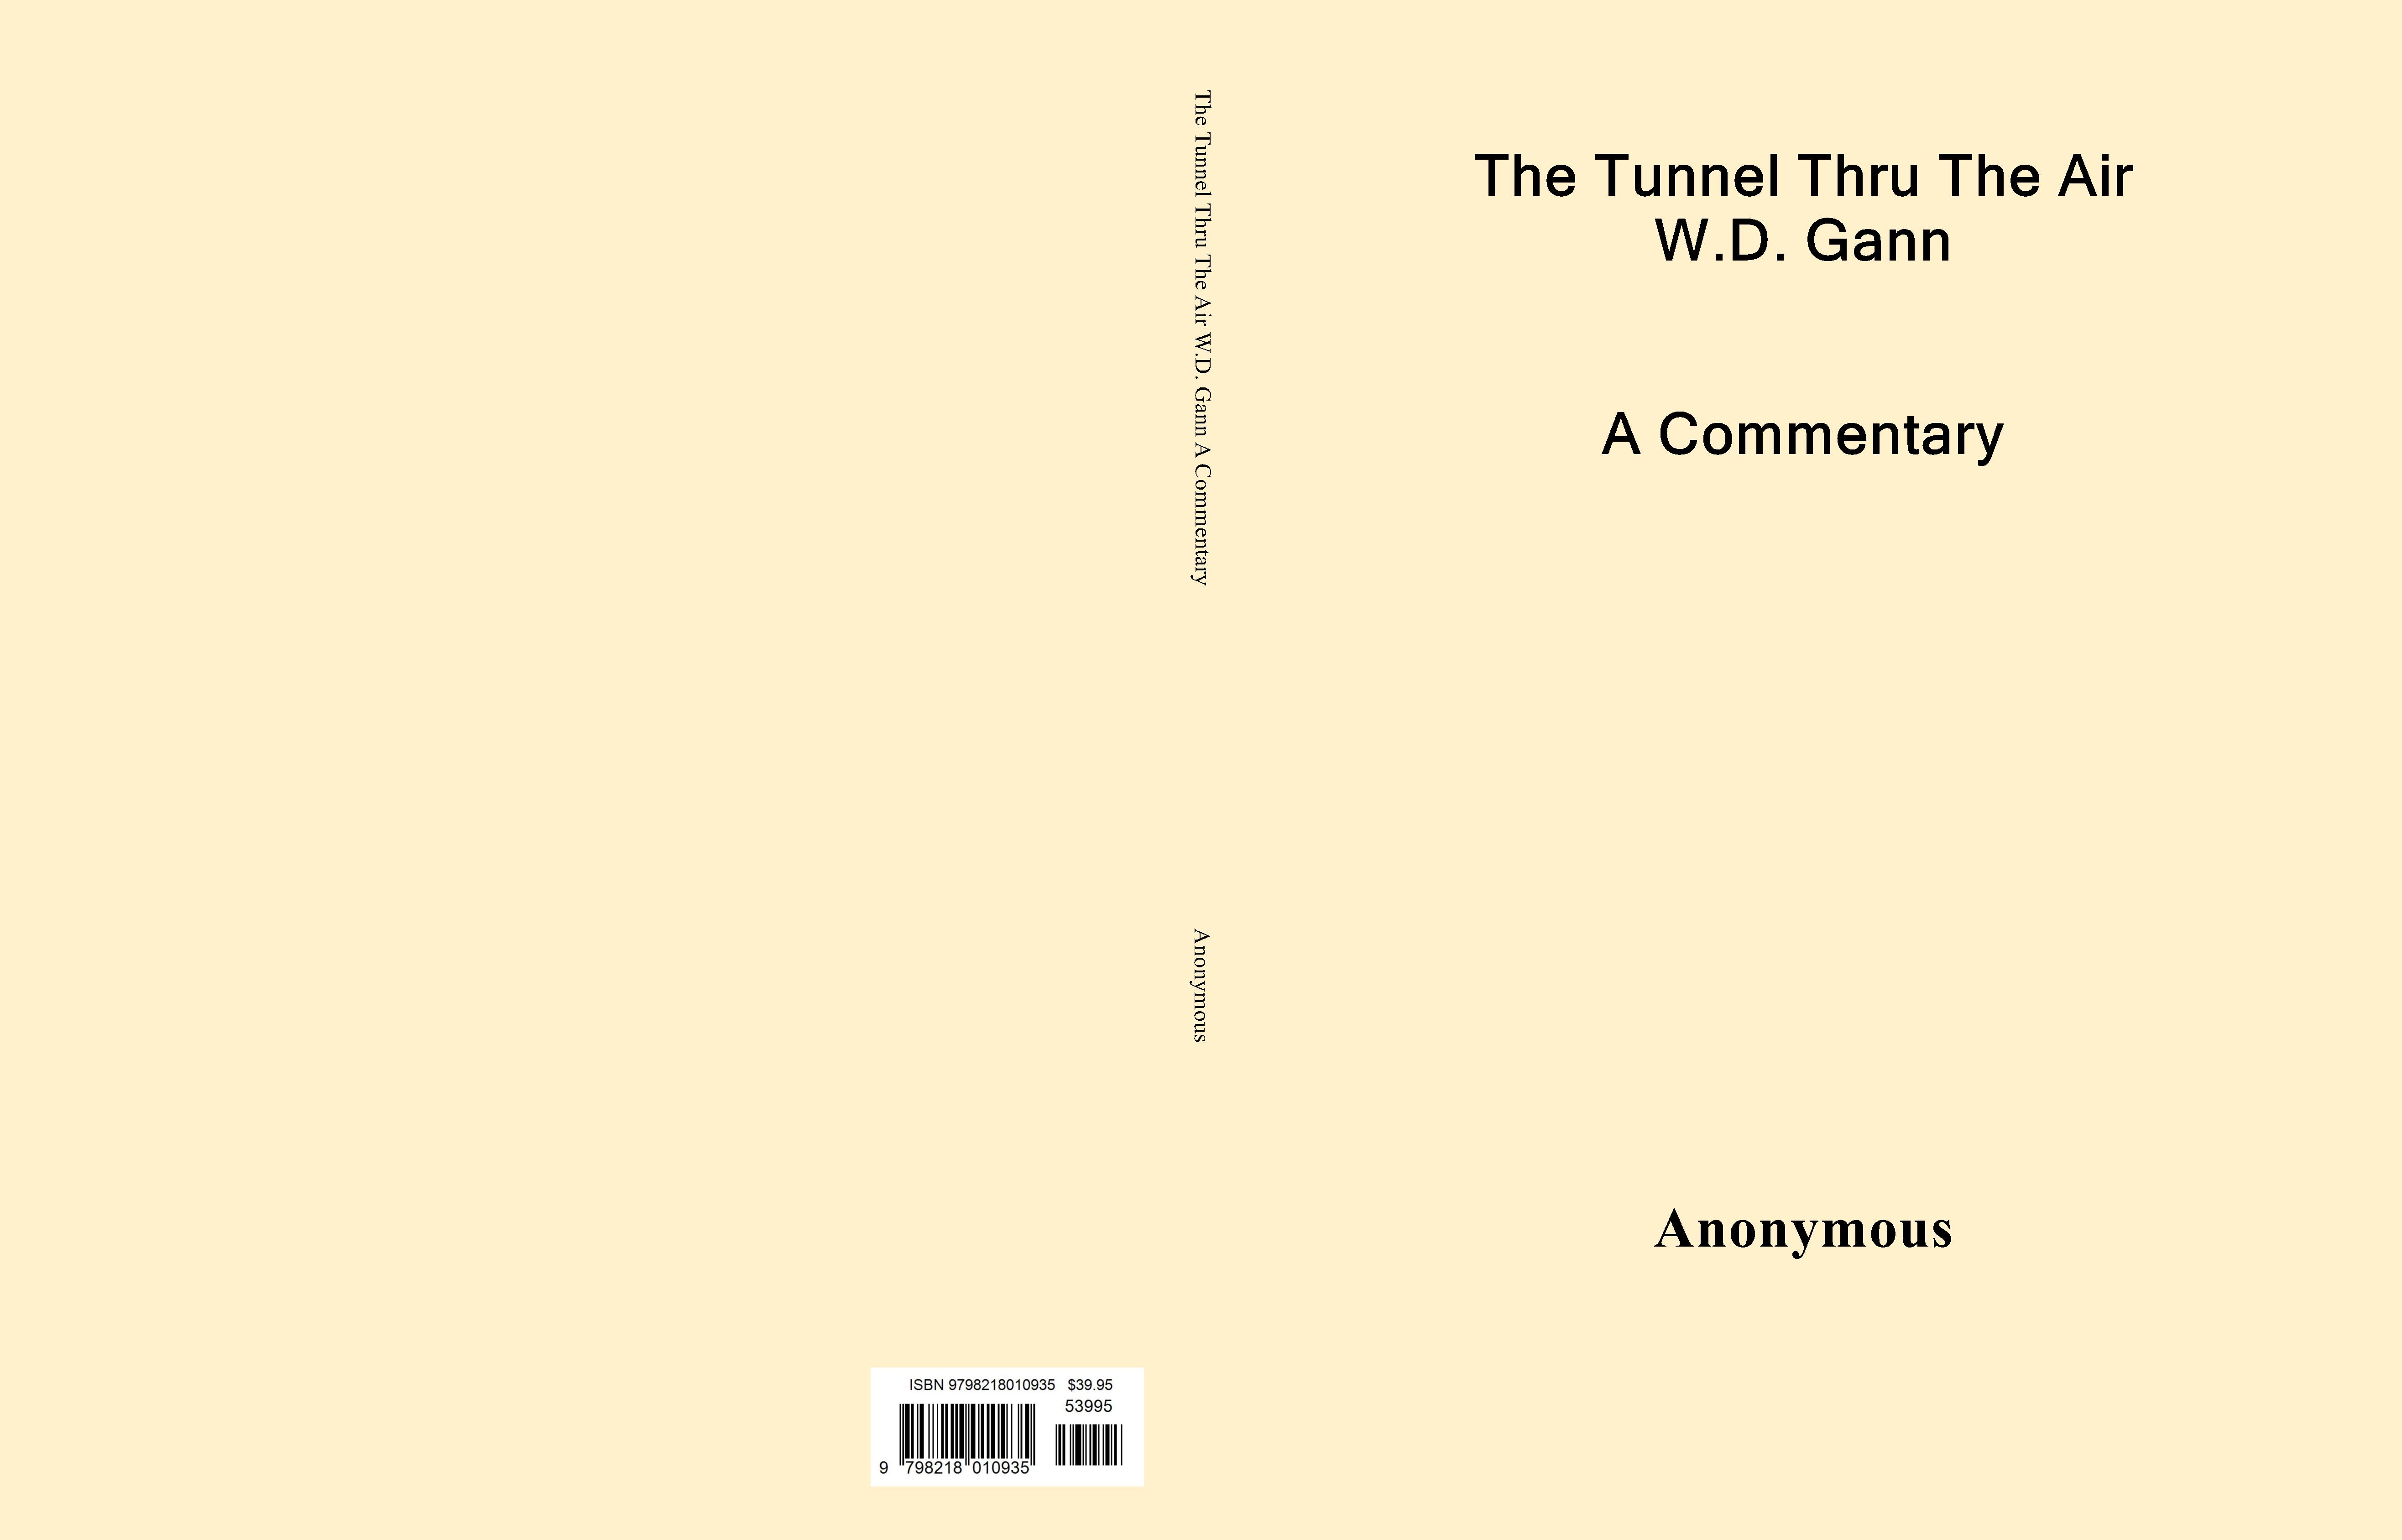 The Tunnel Thru The Air W.D. Gann A Commentary cover image